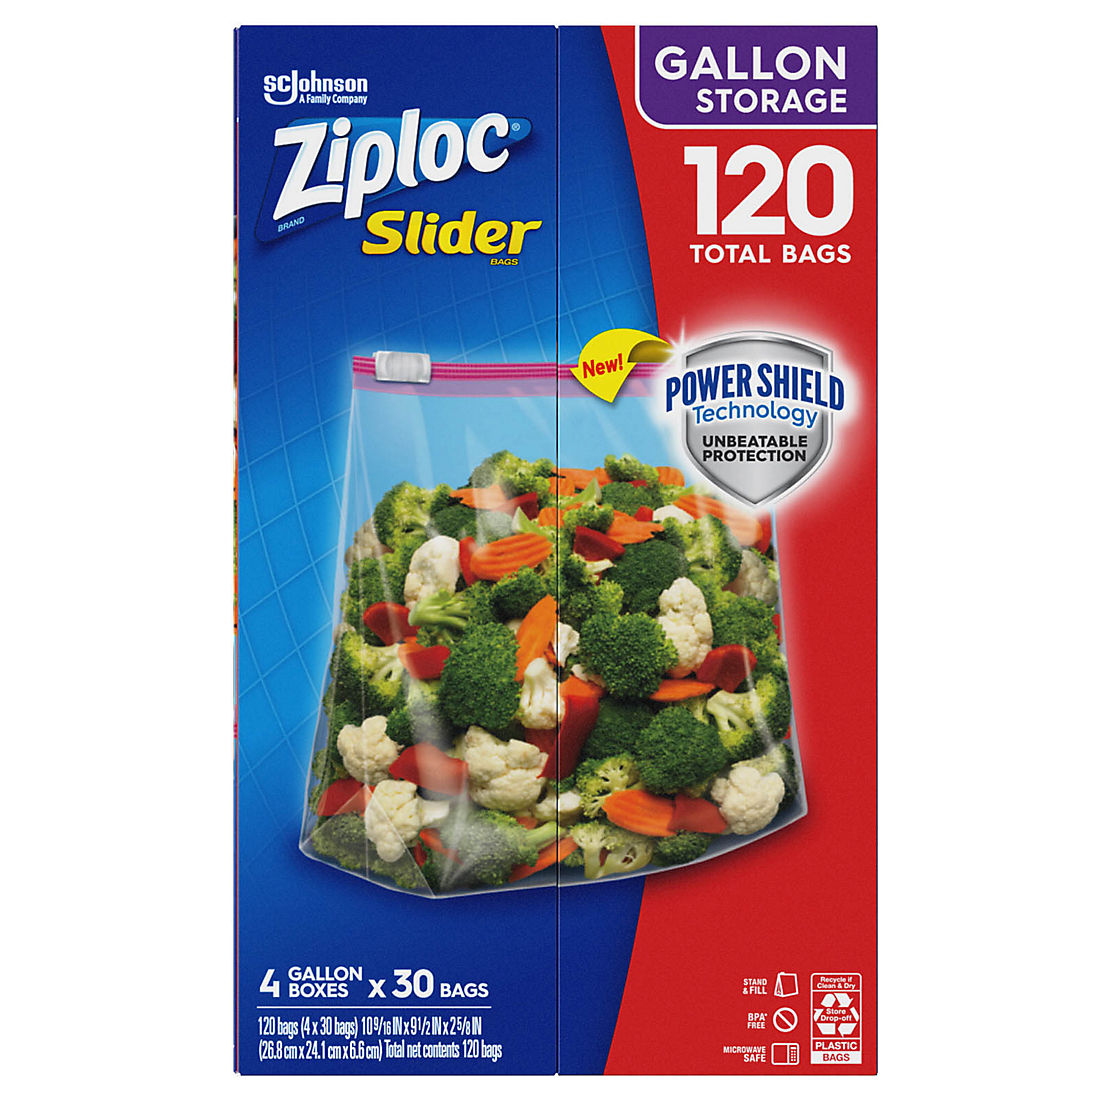 , Clear Pack of 1 Ziploc Brand Slider Storage Gallon Bags with Power Shield Technology, #.40 Count 